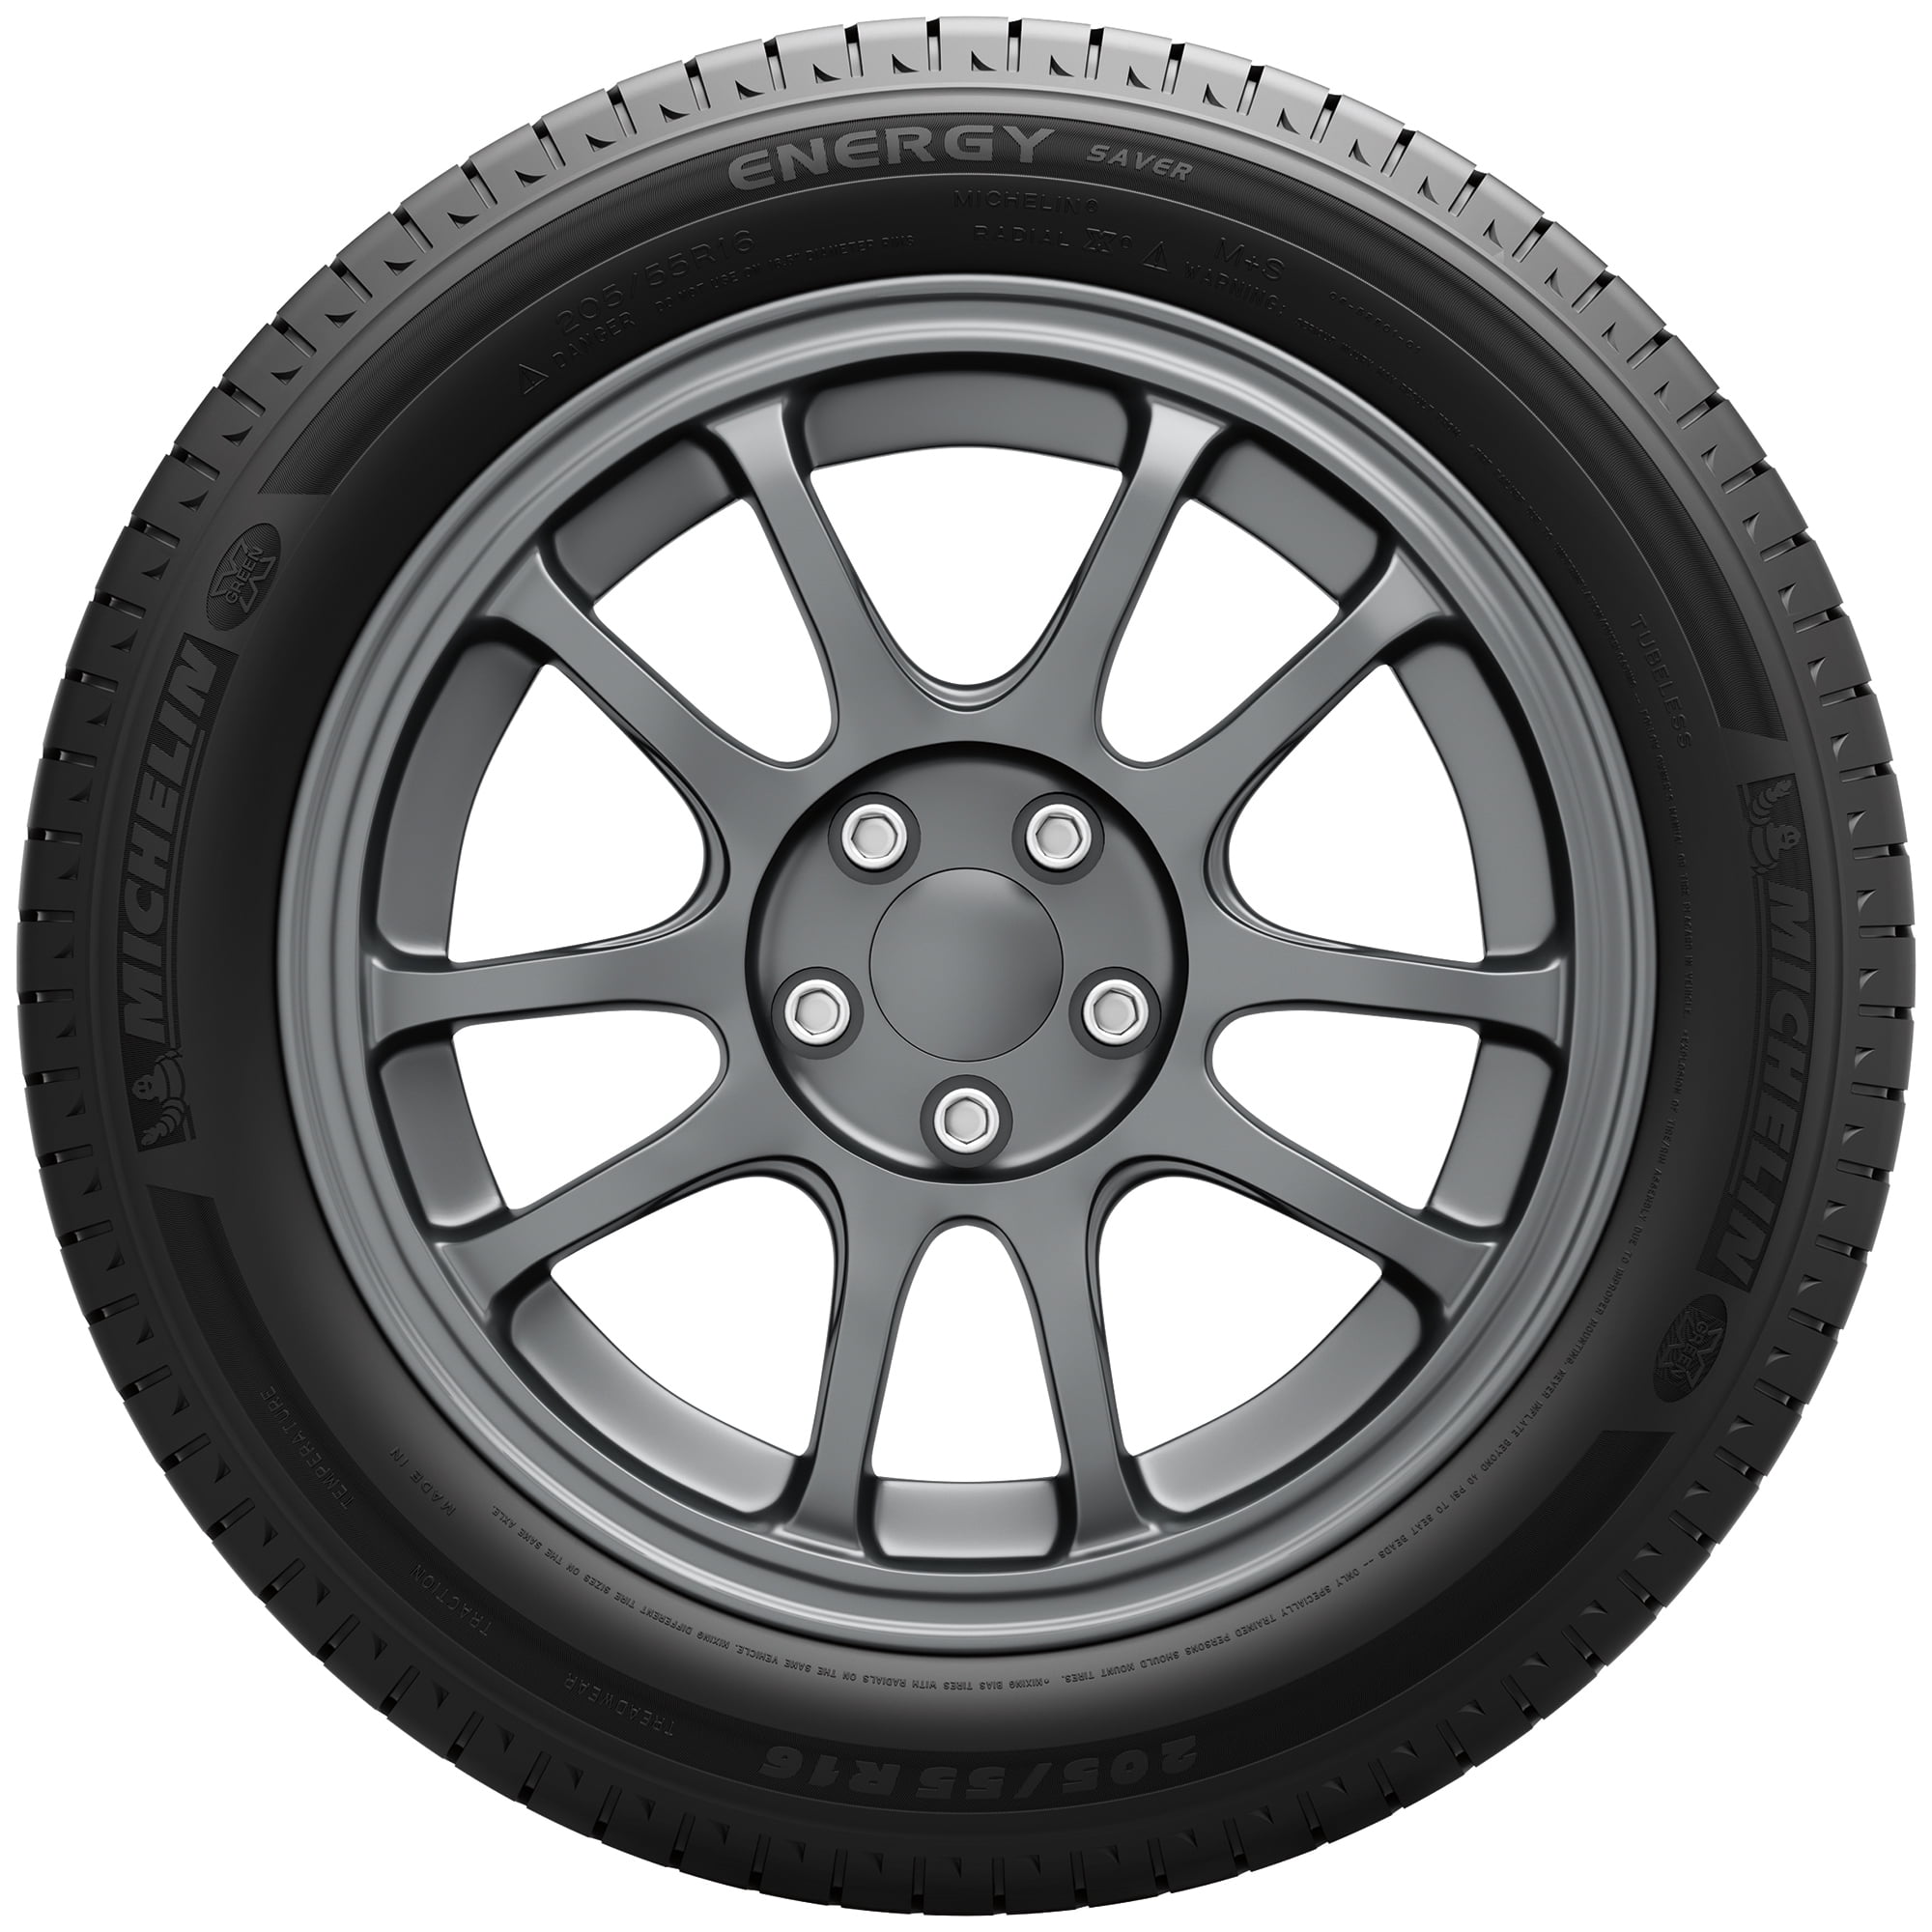 16 Cm 195 Cm Michelin 195/55r16-87v Xm2 Tubeless Car Tyre, Aspect Ratio: 55  Cm at Rs 8500 in Pune